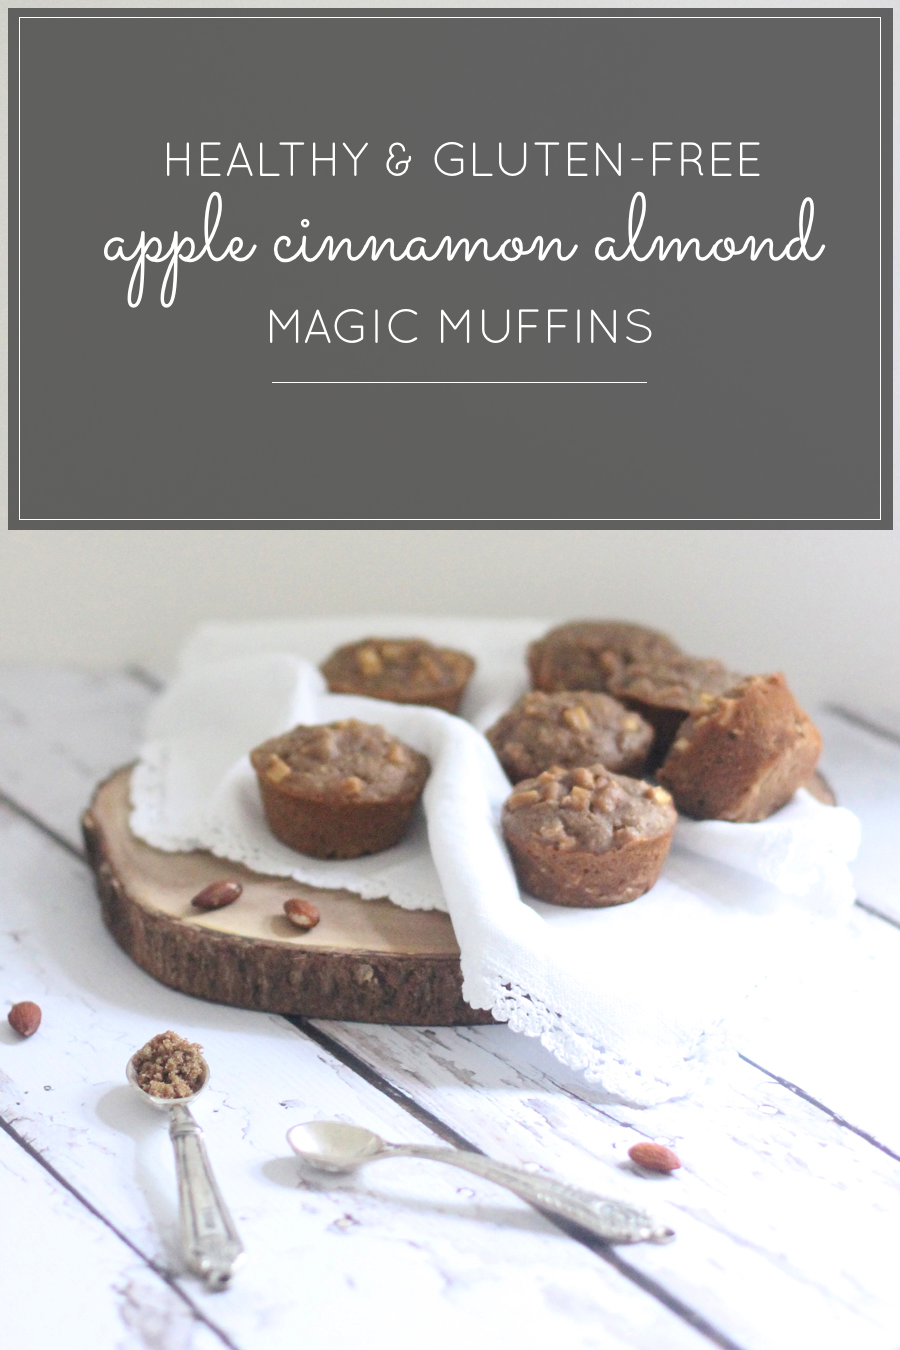 Healthy Gluten-Free Apple Cinnamon Almond Muffins; dairy-free, gluten-free, oil-free, and happen to taste amazing. For some crazy recipe science reason, these healthy muffins come out magically moist, cakey, and delicious.